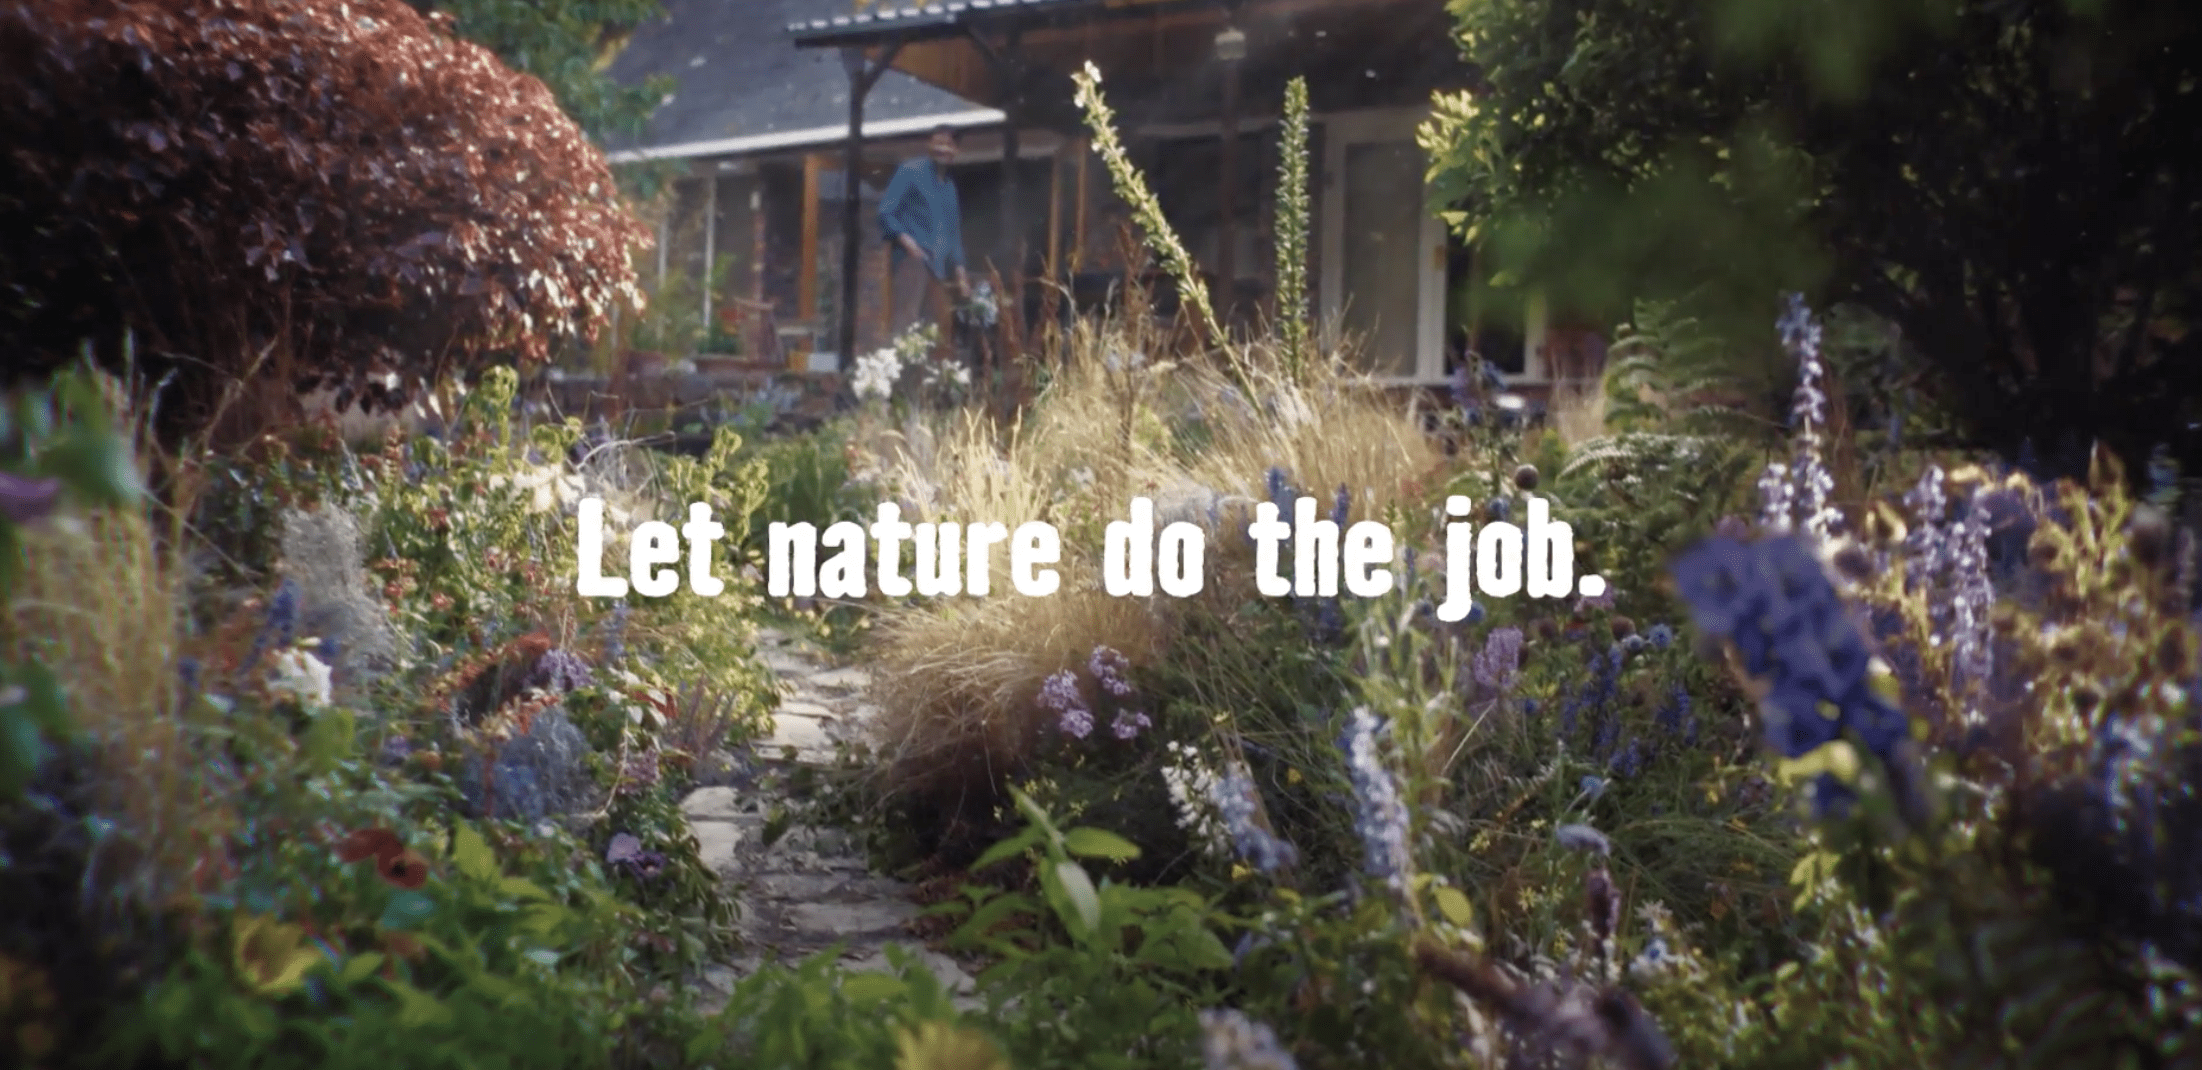 Garden with white text that reads "Let nature do the job"